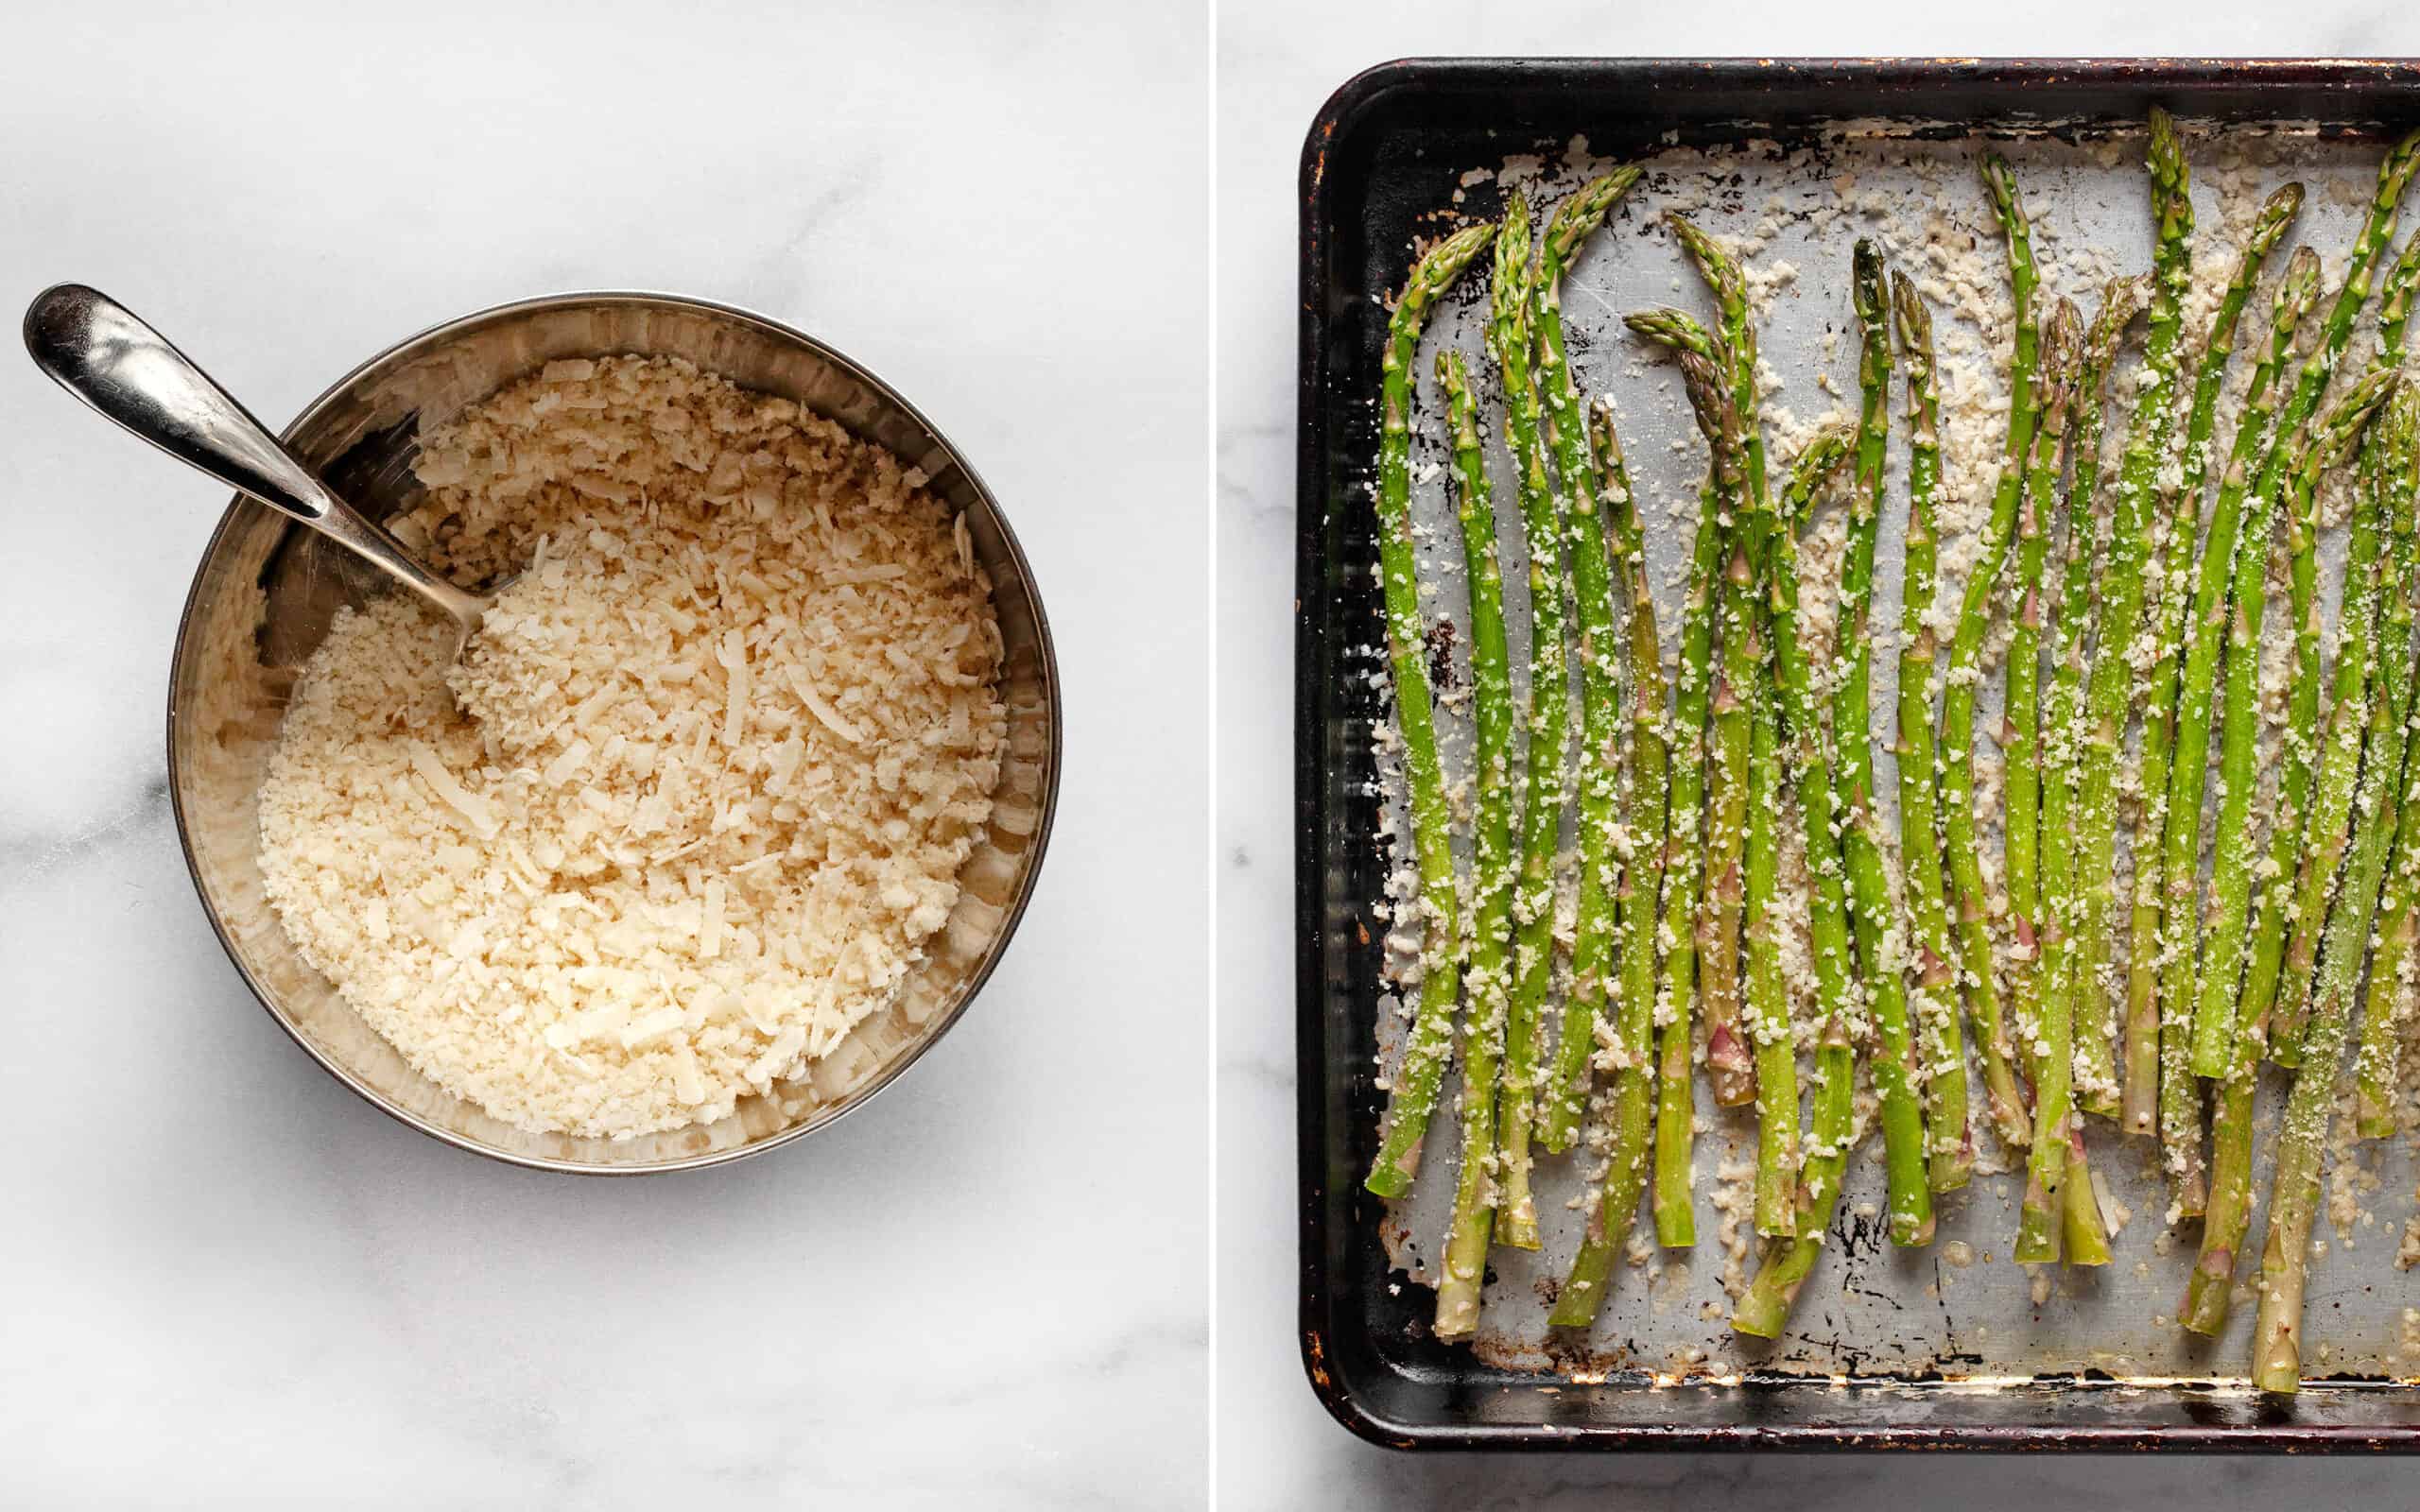 Combine the panko breadcrumbs ans Parmesan in a bowl. Sprinkle the asparagus on the sheet pan with the mixture.